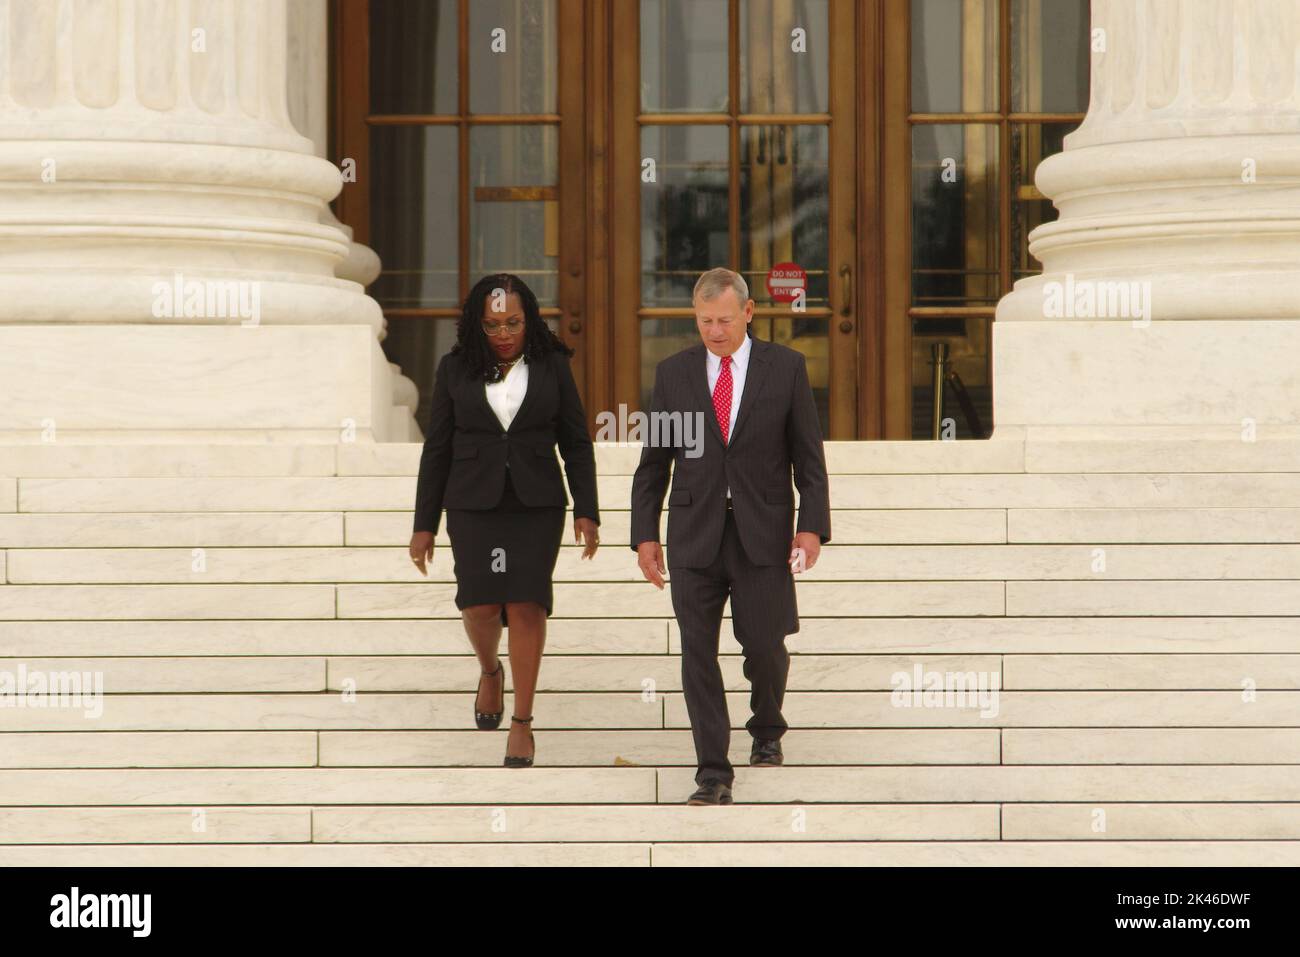 Washington DC, USA. 30 Sep 2022. Ketanji Brown Jackson, the first African-American woman to serve on the U.S. Supreme Court, walks down the courthouse steps with Chief Justice John Roberts following her ceremonial swearing-in. Credit: Philip Yabut/Alamy Live News Stock Photo